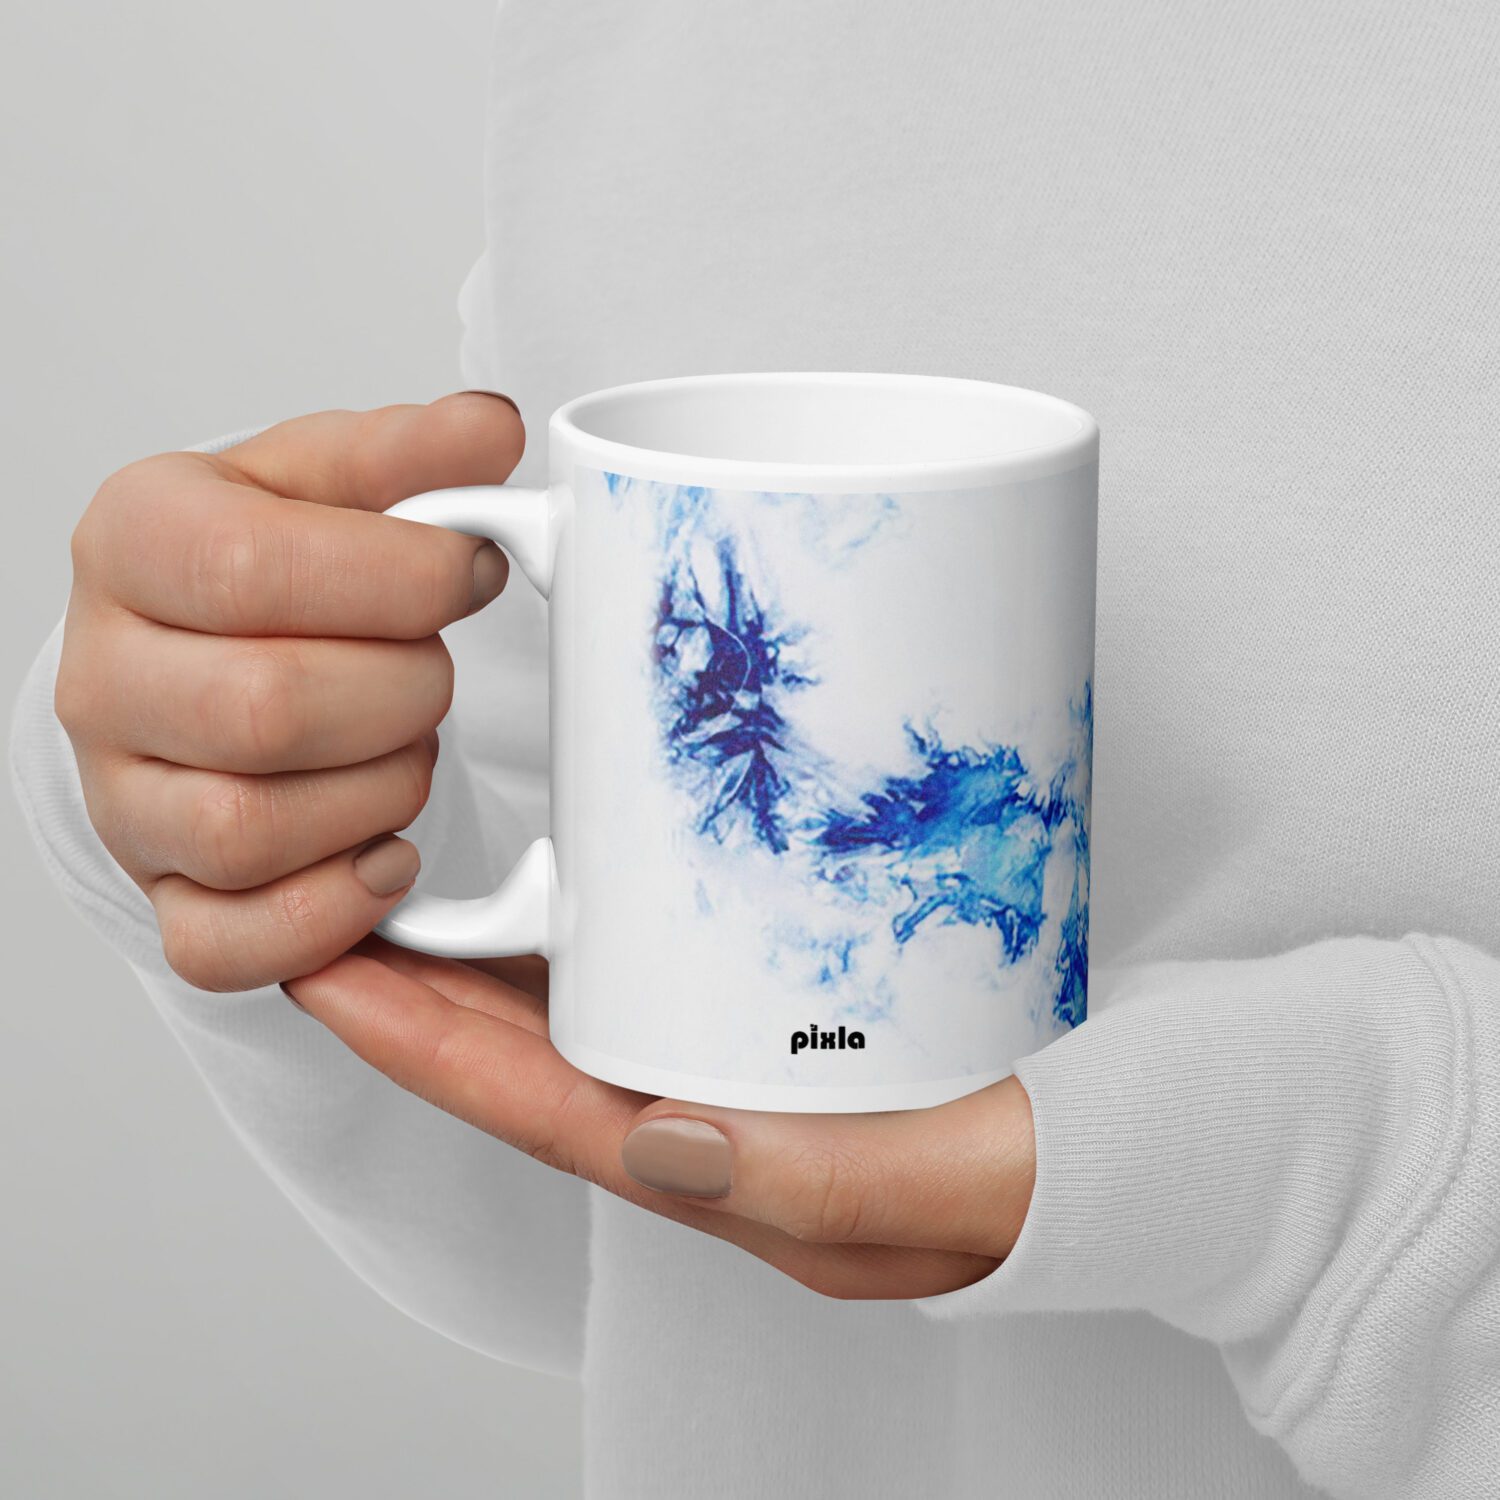 The perfect white and glossy white and blue tie dye mug that’s sturdy and comfortable with a vivid print that’ll withstand the microwave and dishwasher.